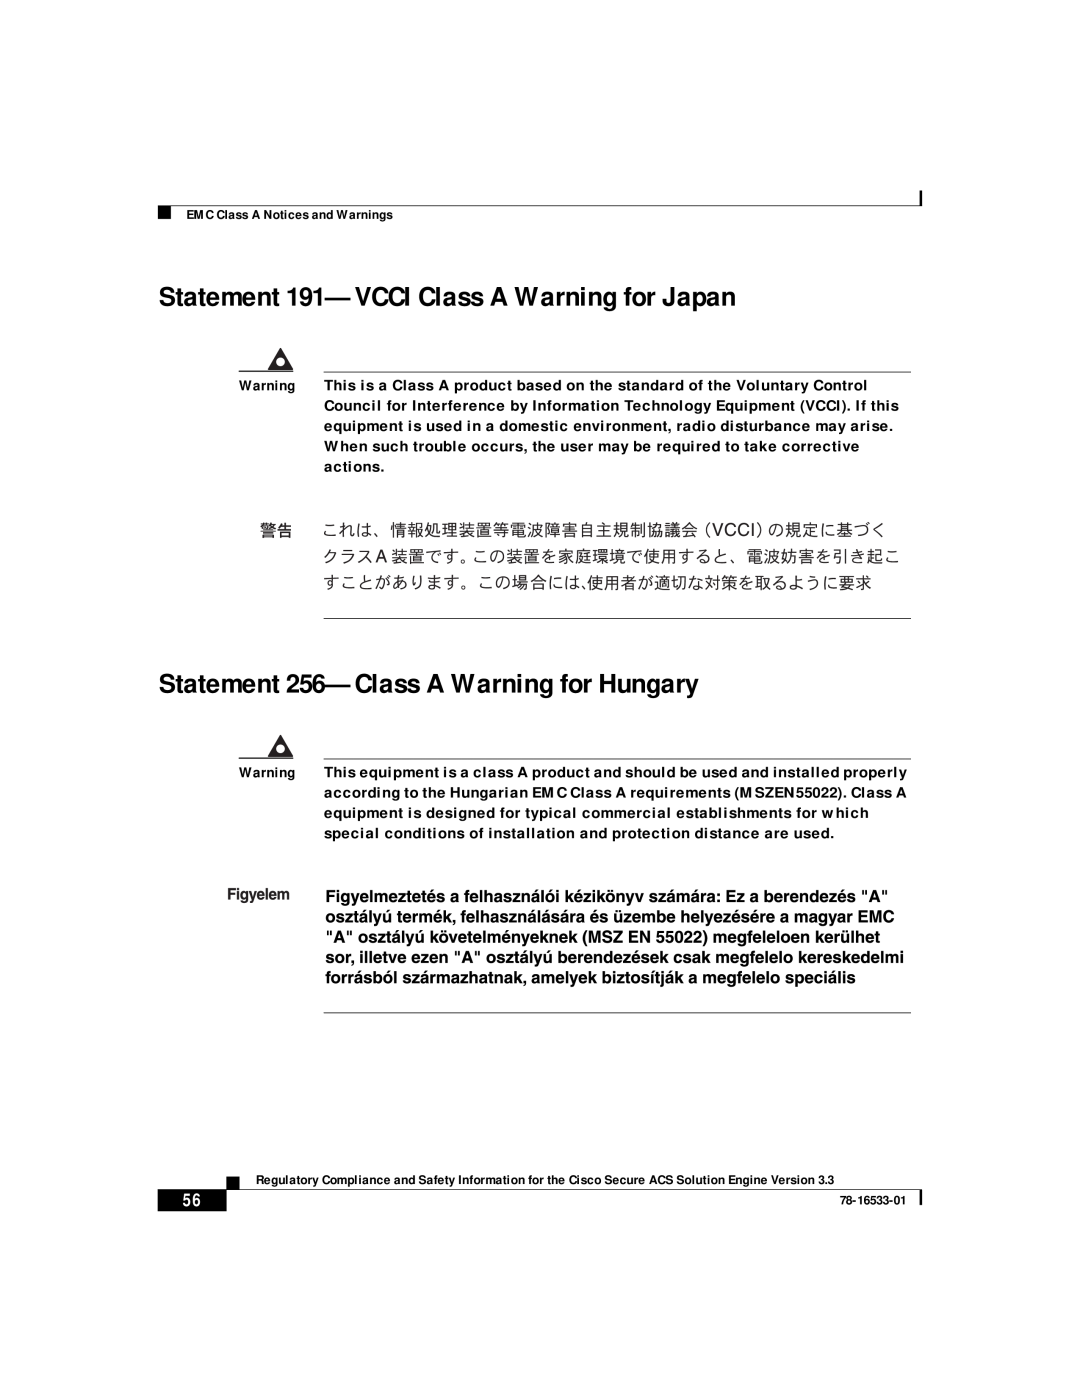 Cisco Systems CSACSE-1112-K9 manual Statement 191-VCCI Class A Warning for Japan, Statement 256-Class A Warning for Hungary 